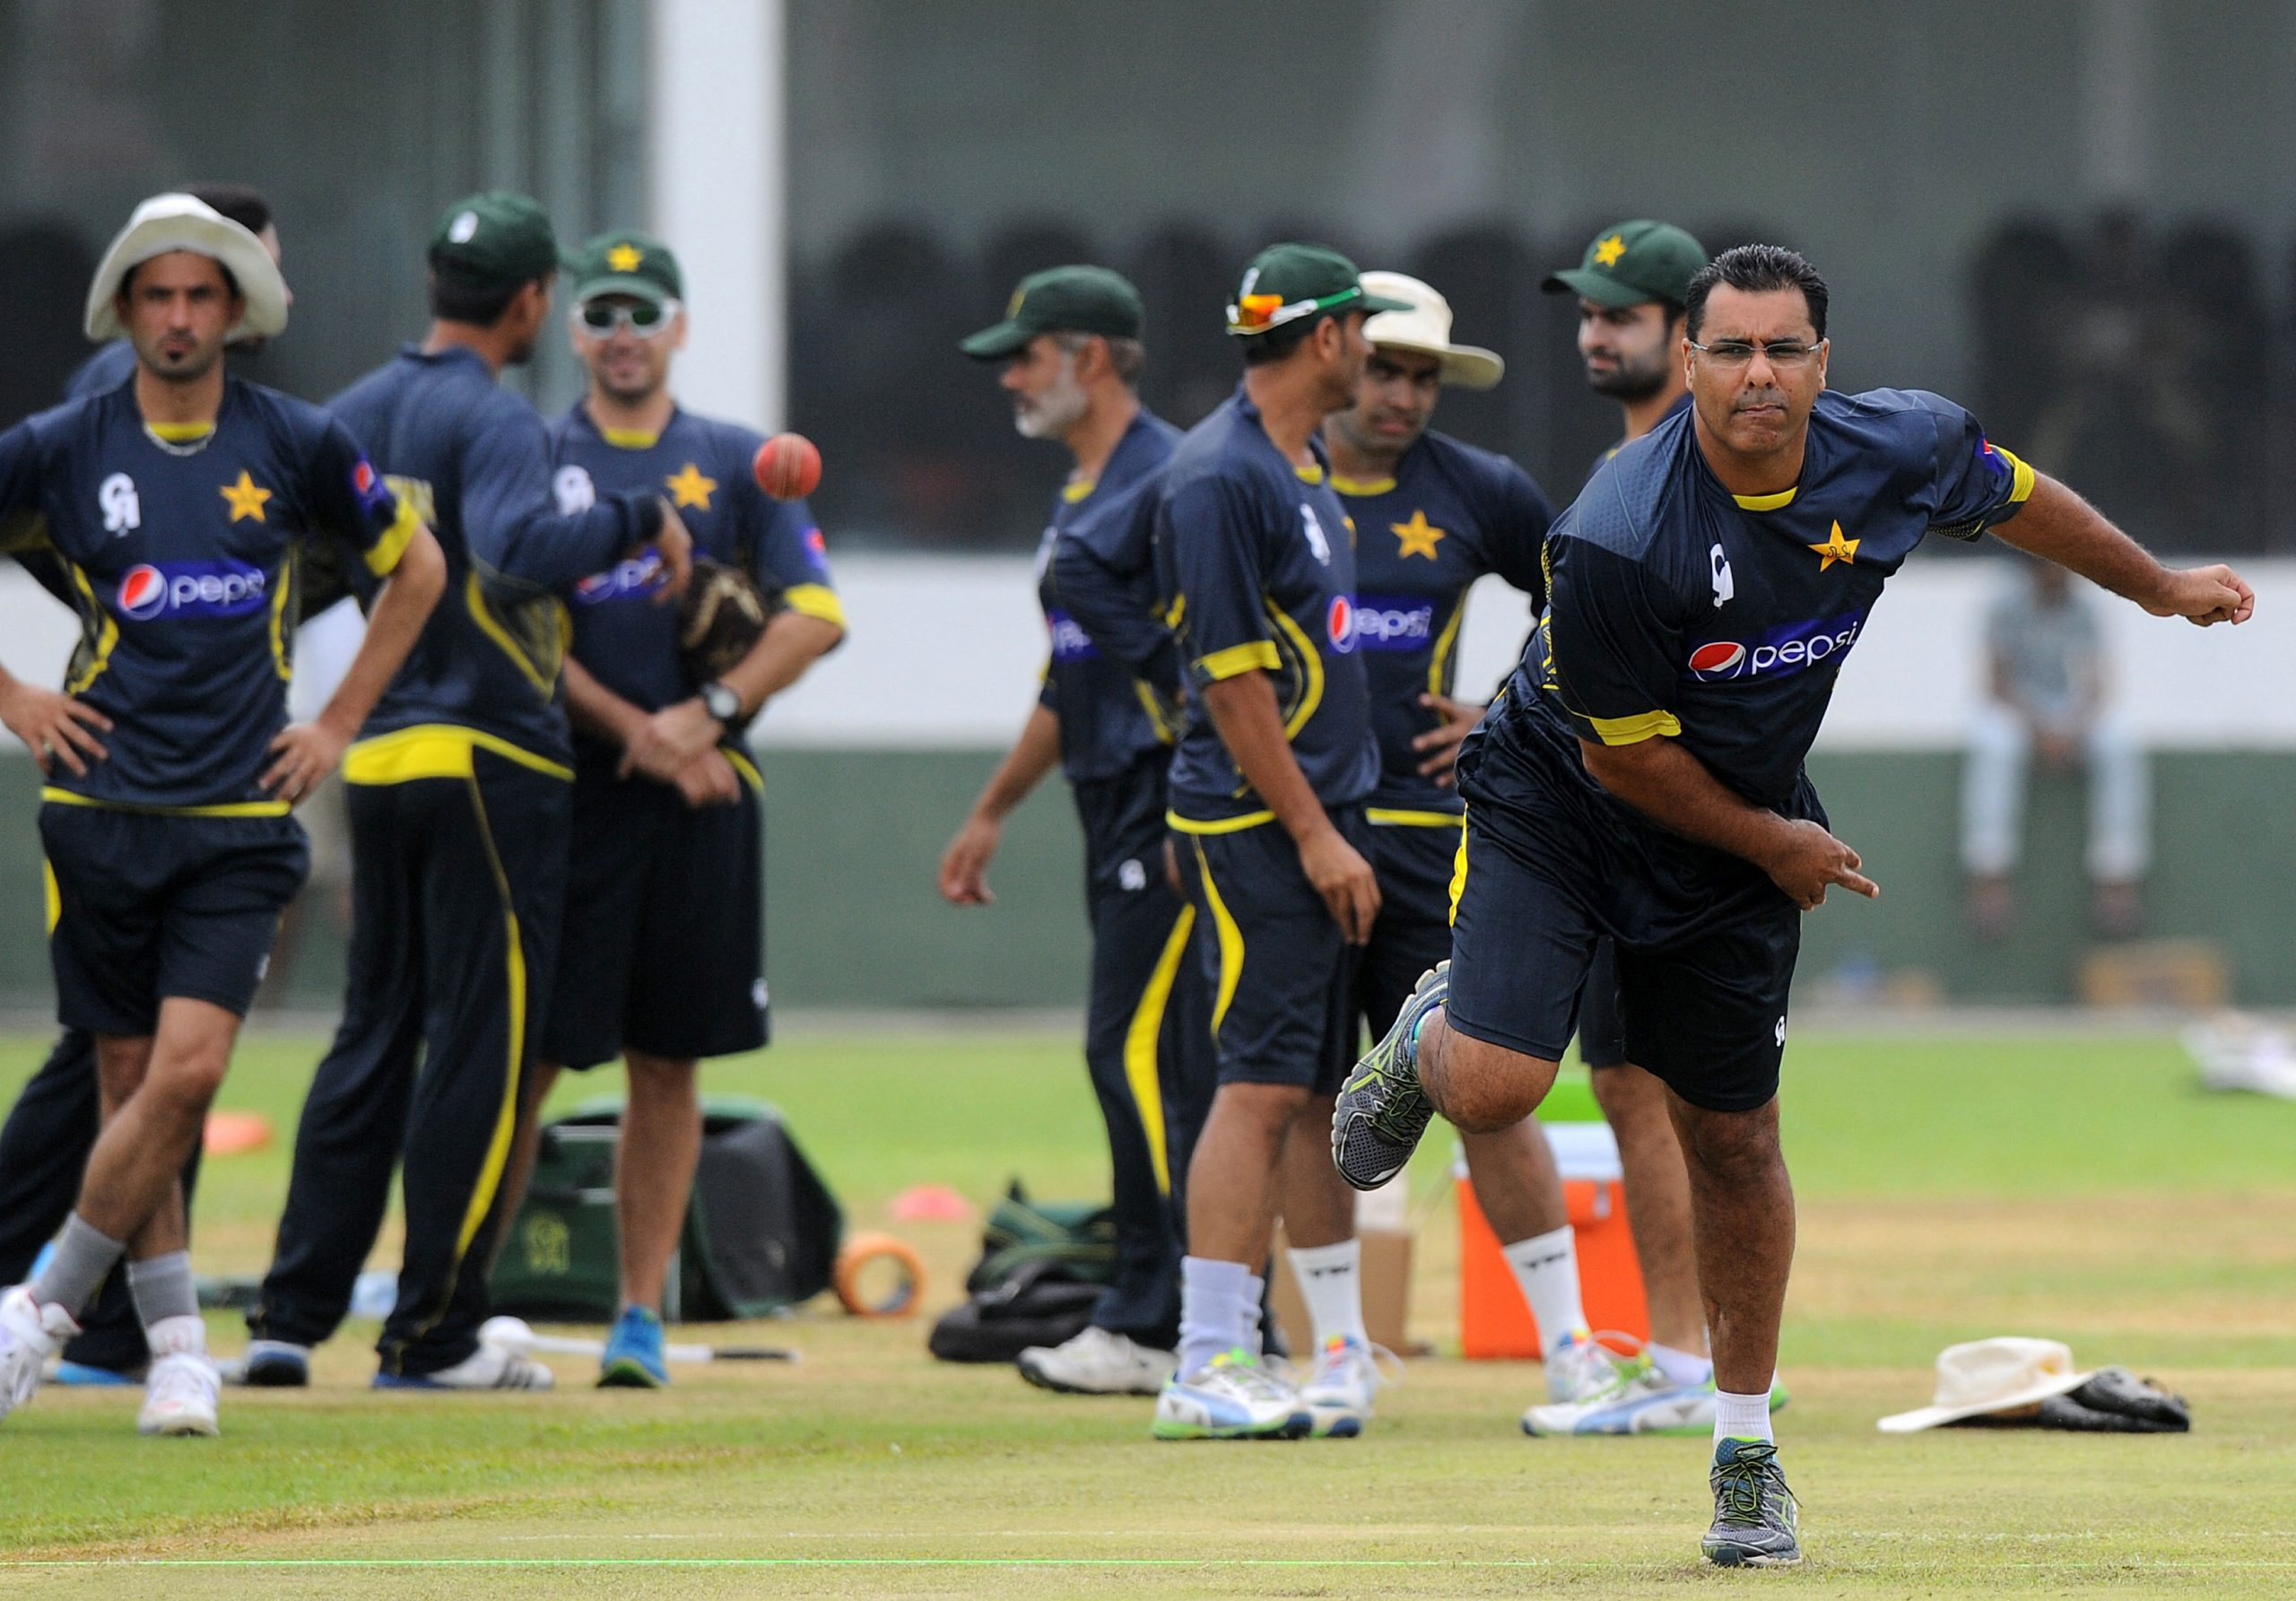 Waqar Younis used to cheat to get reverse swing, alleges Mohammad Asif